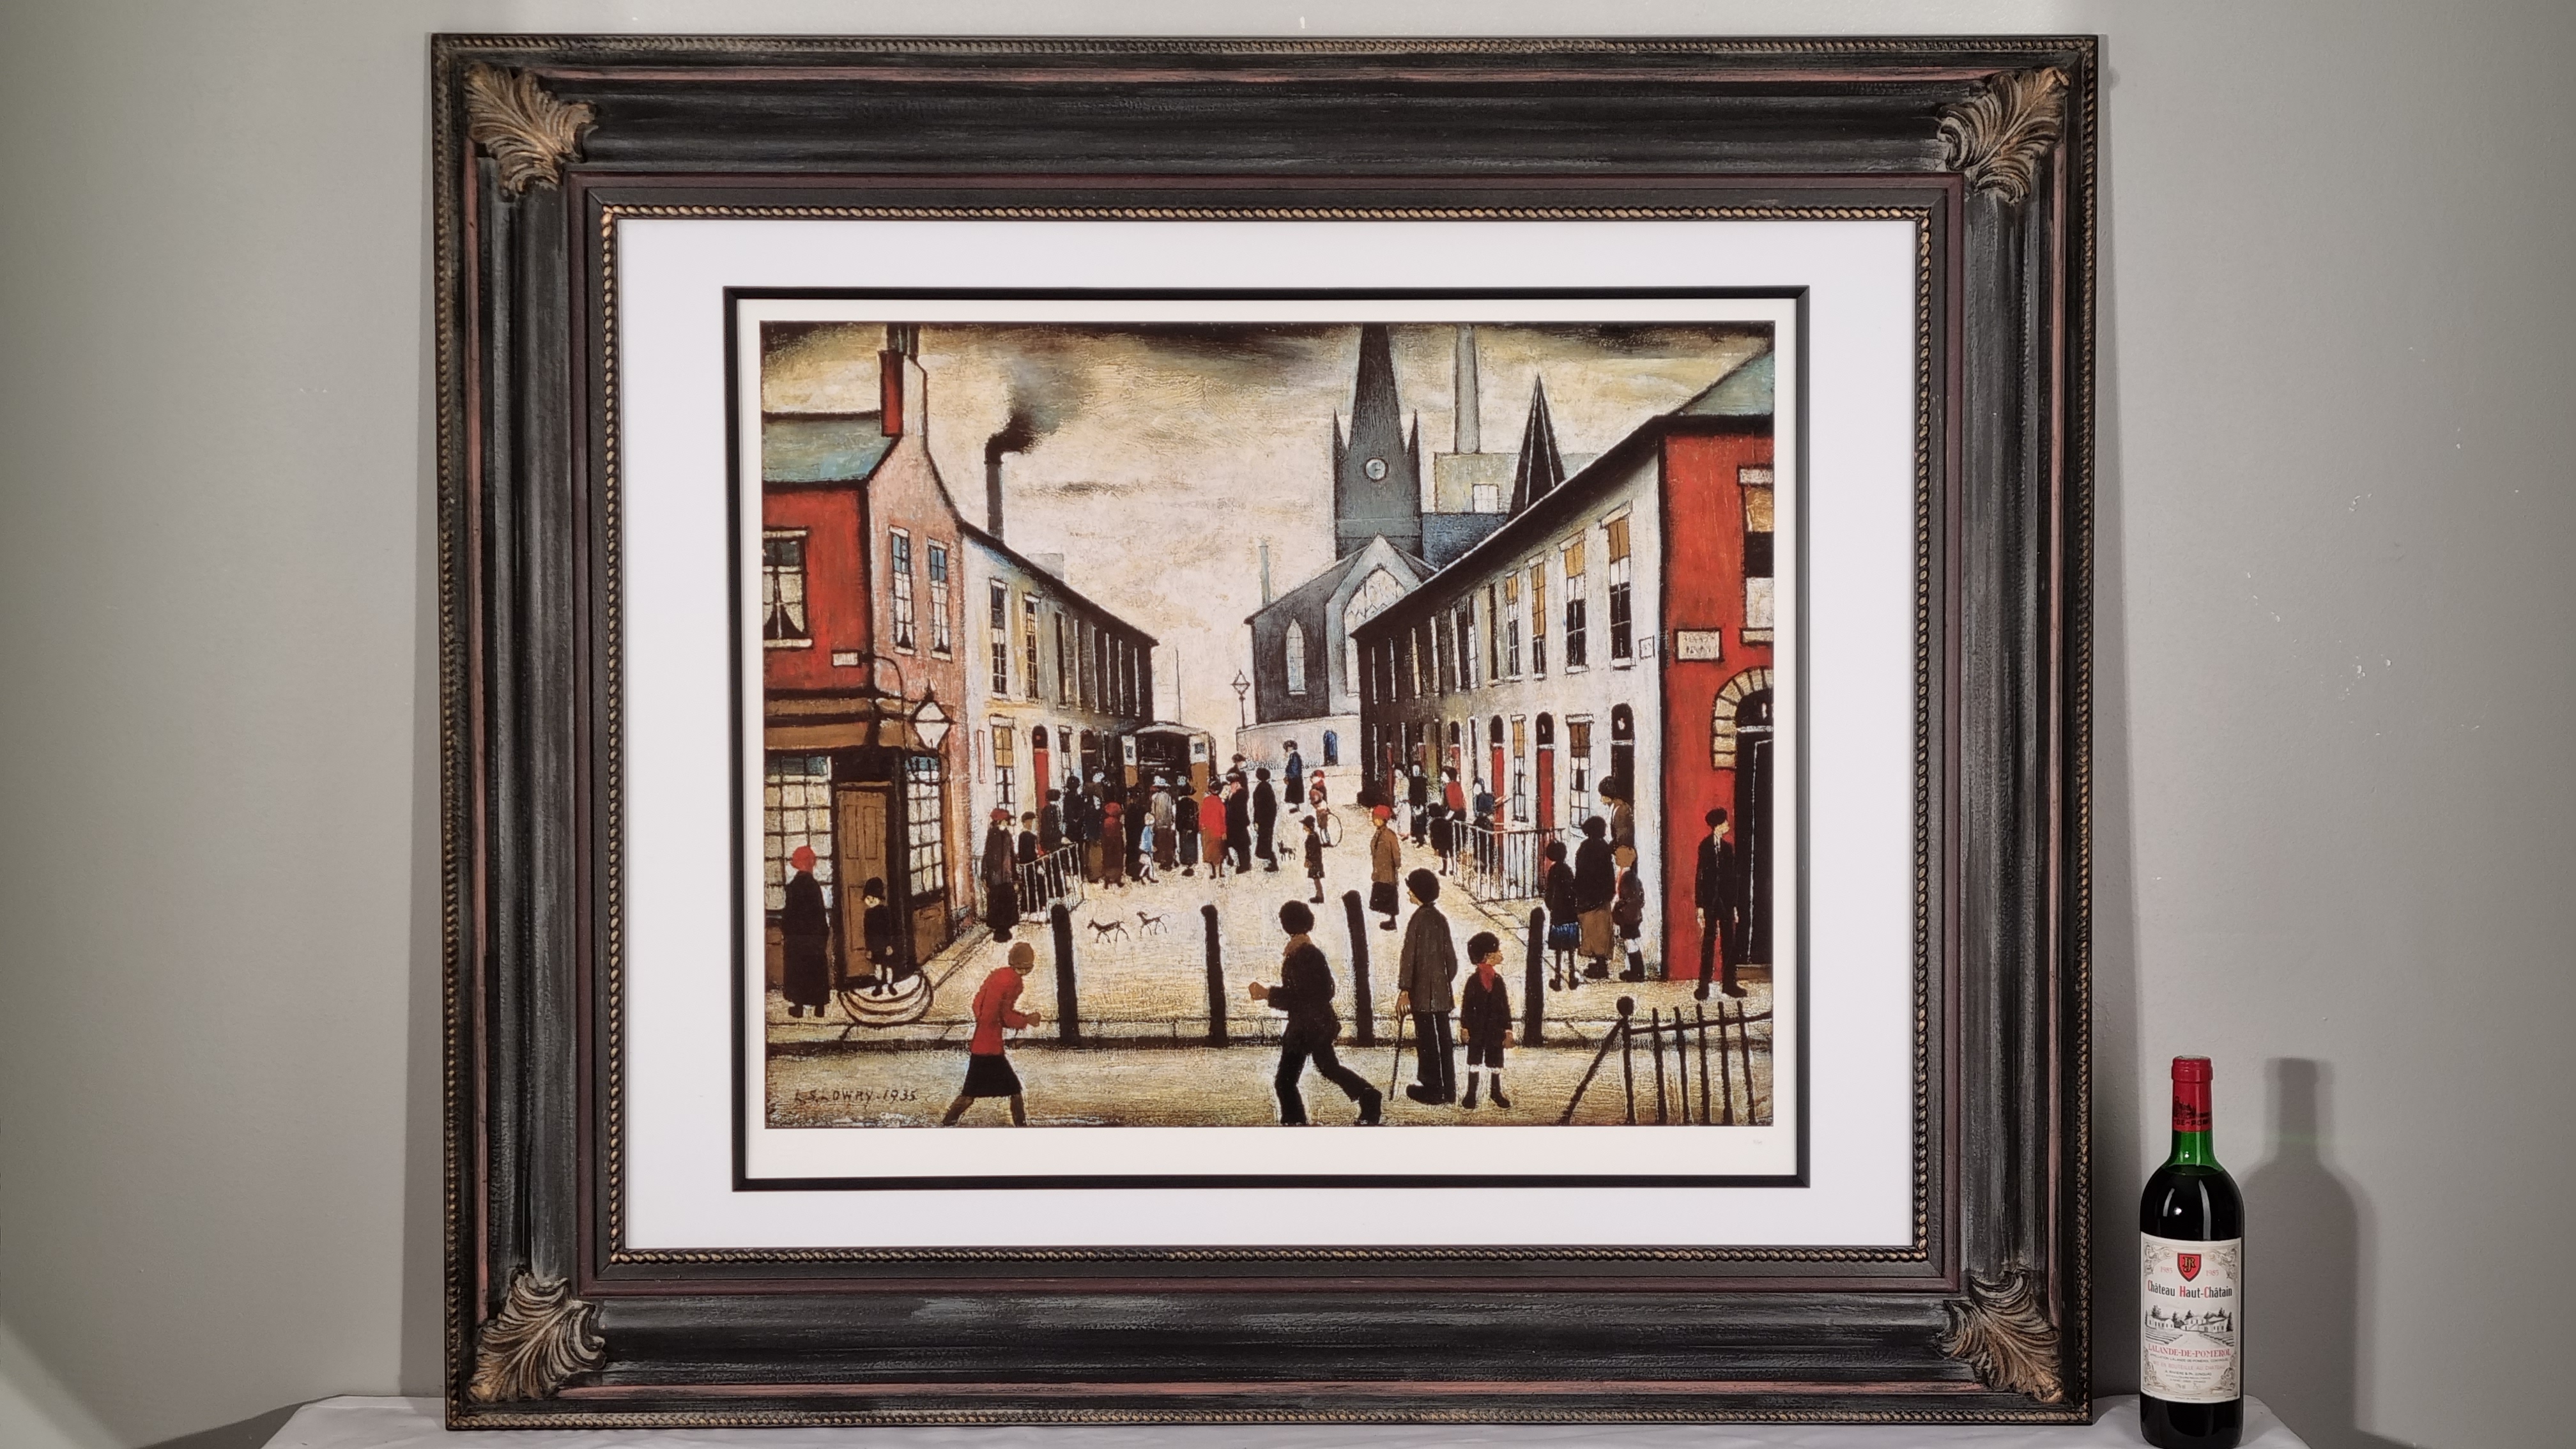 The Fever Van" Limited Edition by L.S. Lowry. - Image 2 of 10